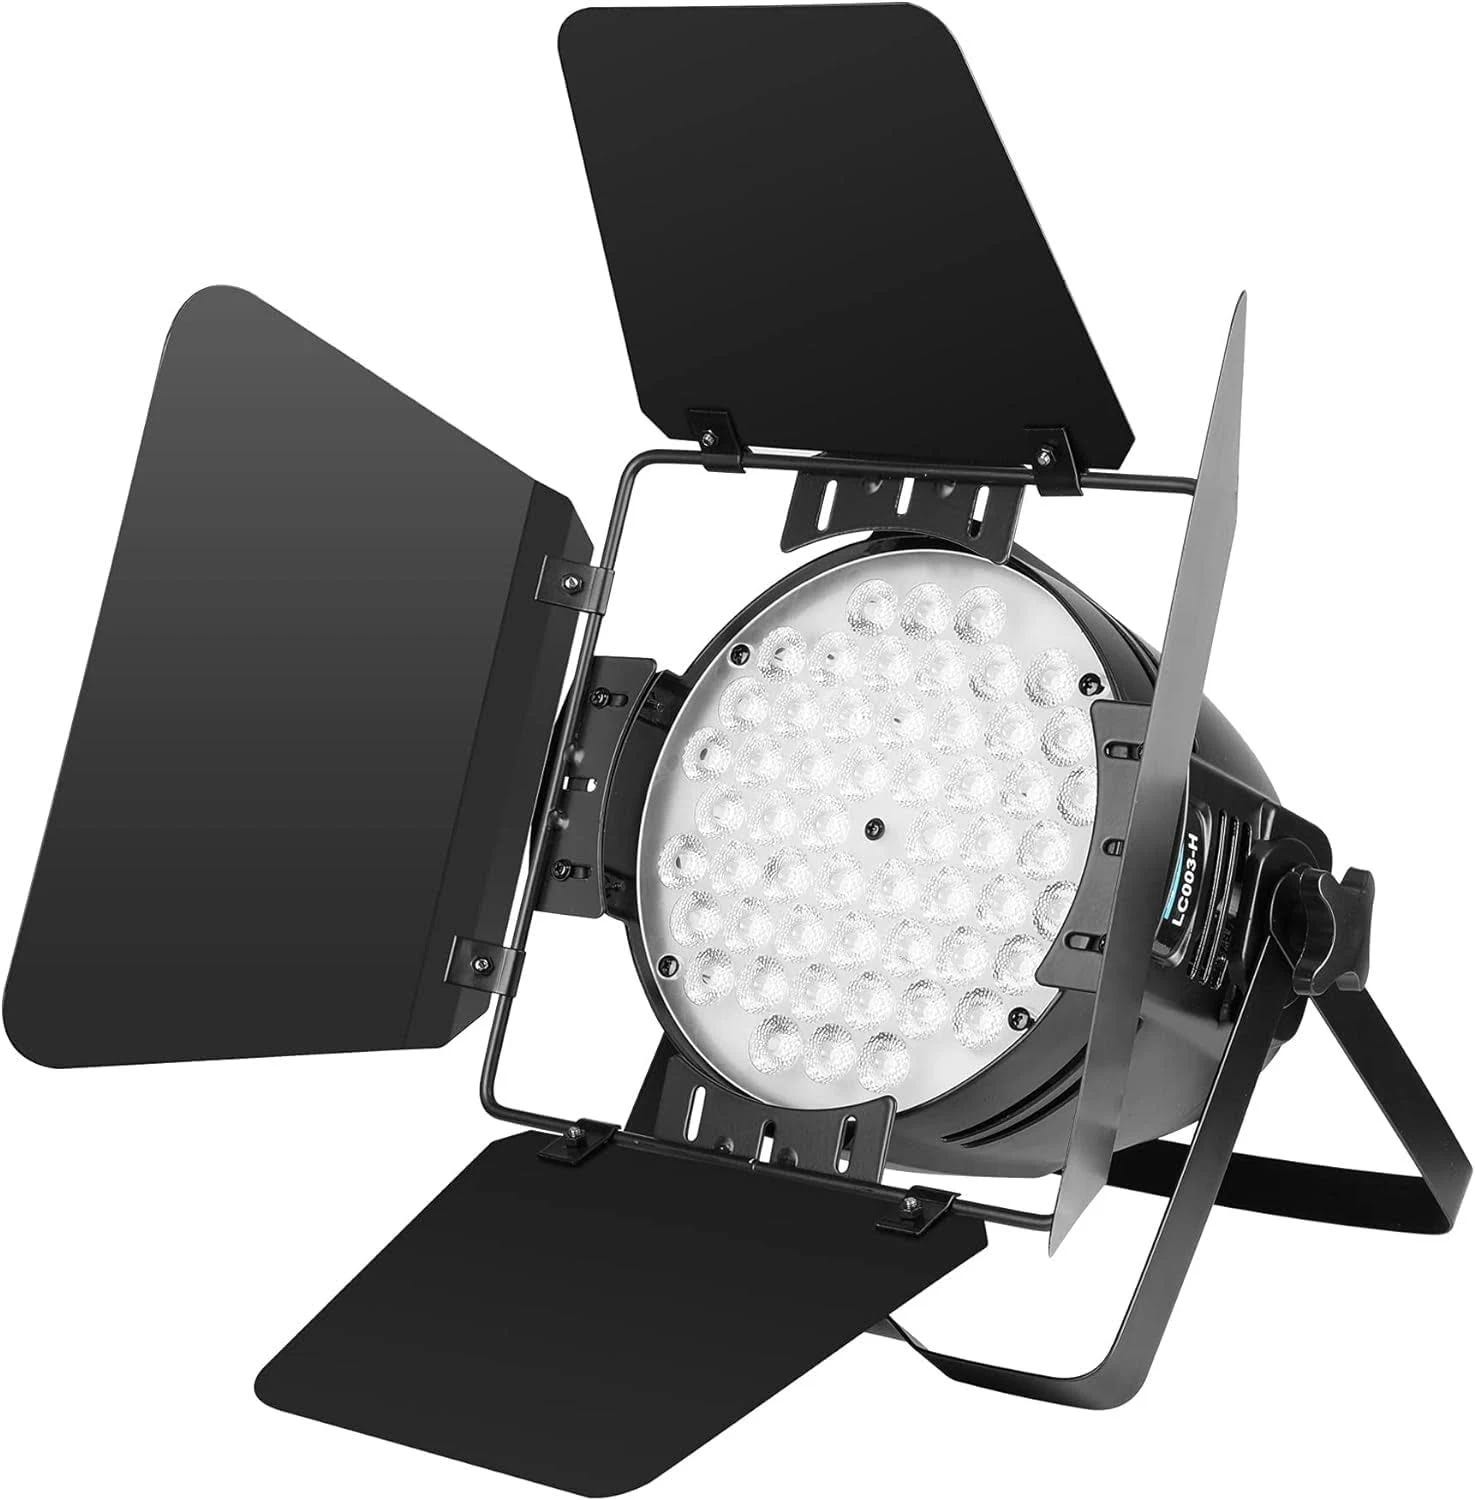 BETOPPER 54 LED Par Light: Super Bright DJ Stage Light with Barndoors and Dimming | Image